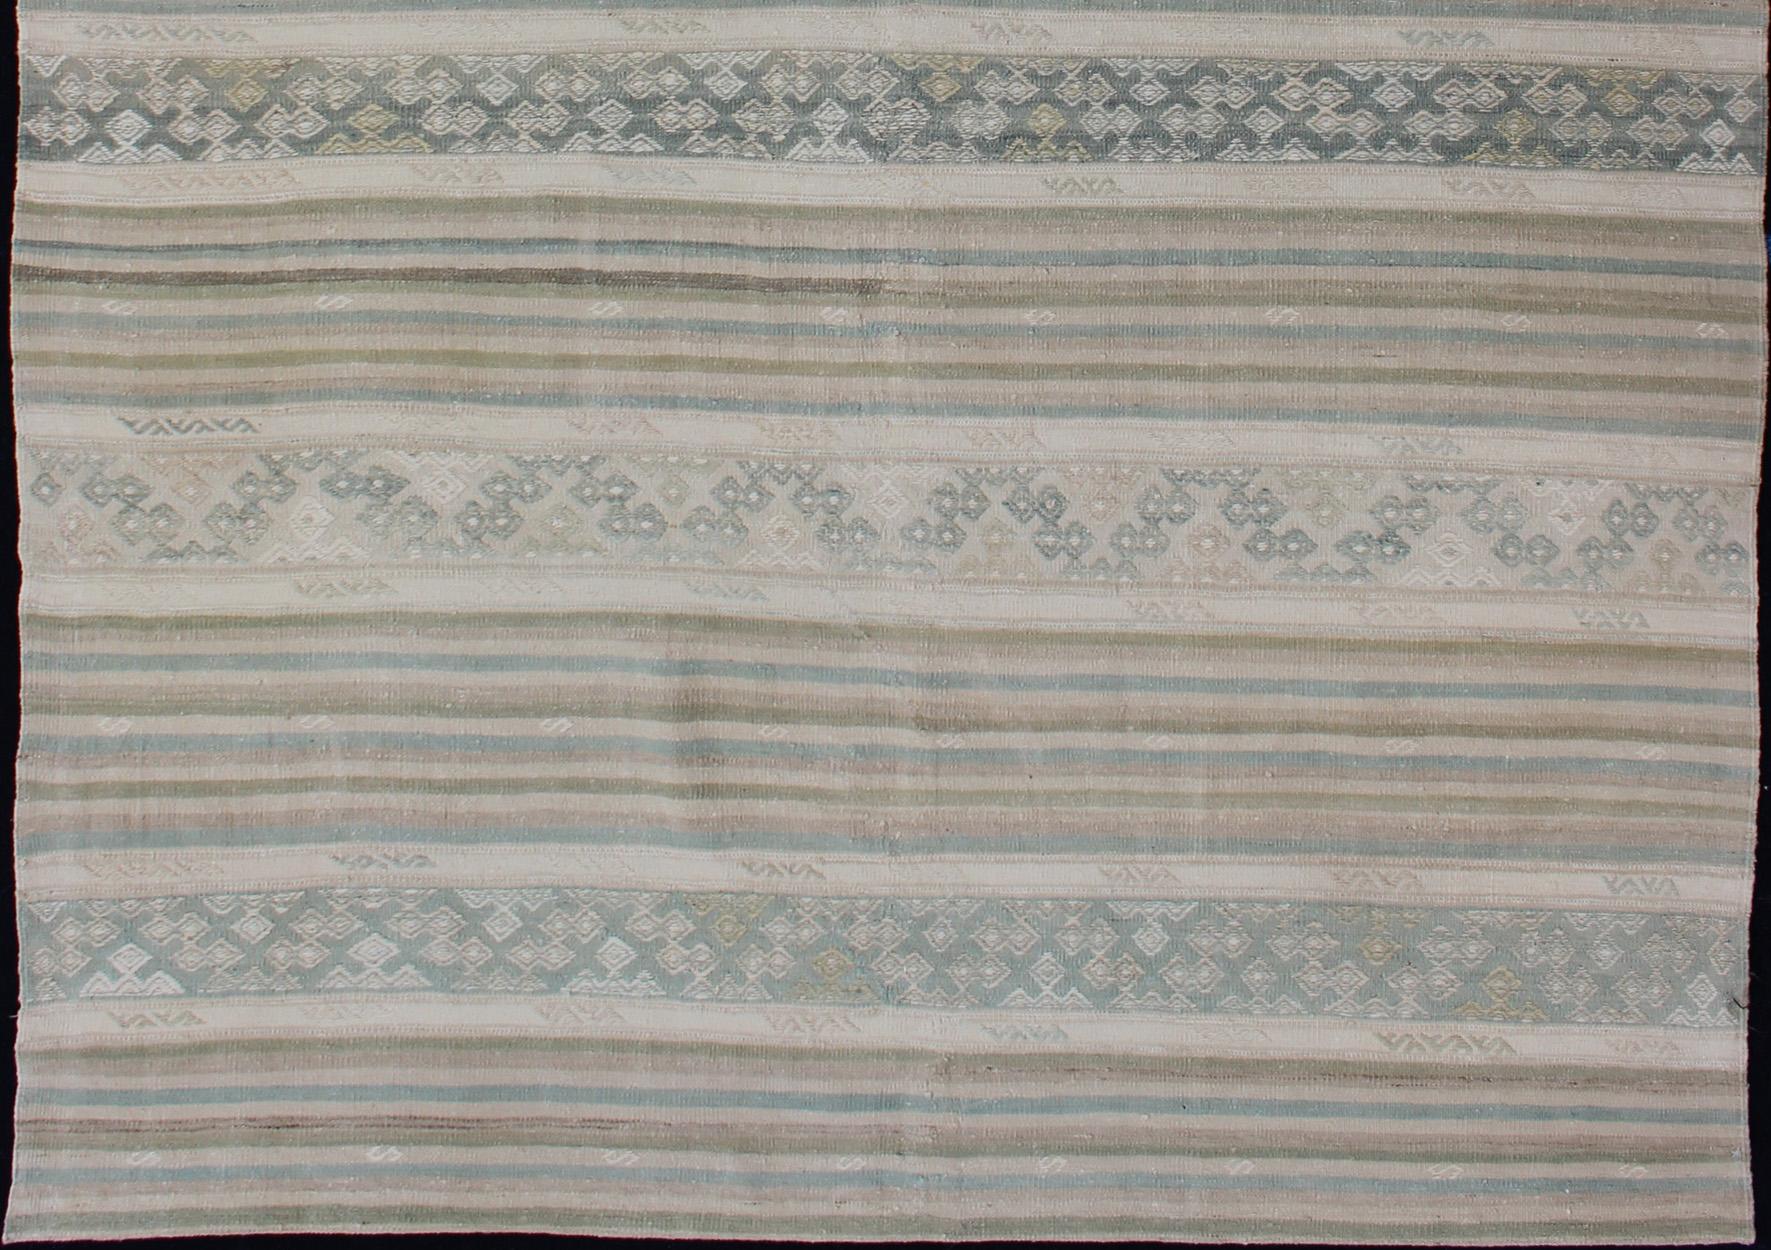 Hand-Woven Turkish Flat-Weave Kilim in Muted Colors with Stripes and Embroideries For Sale